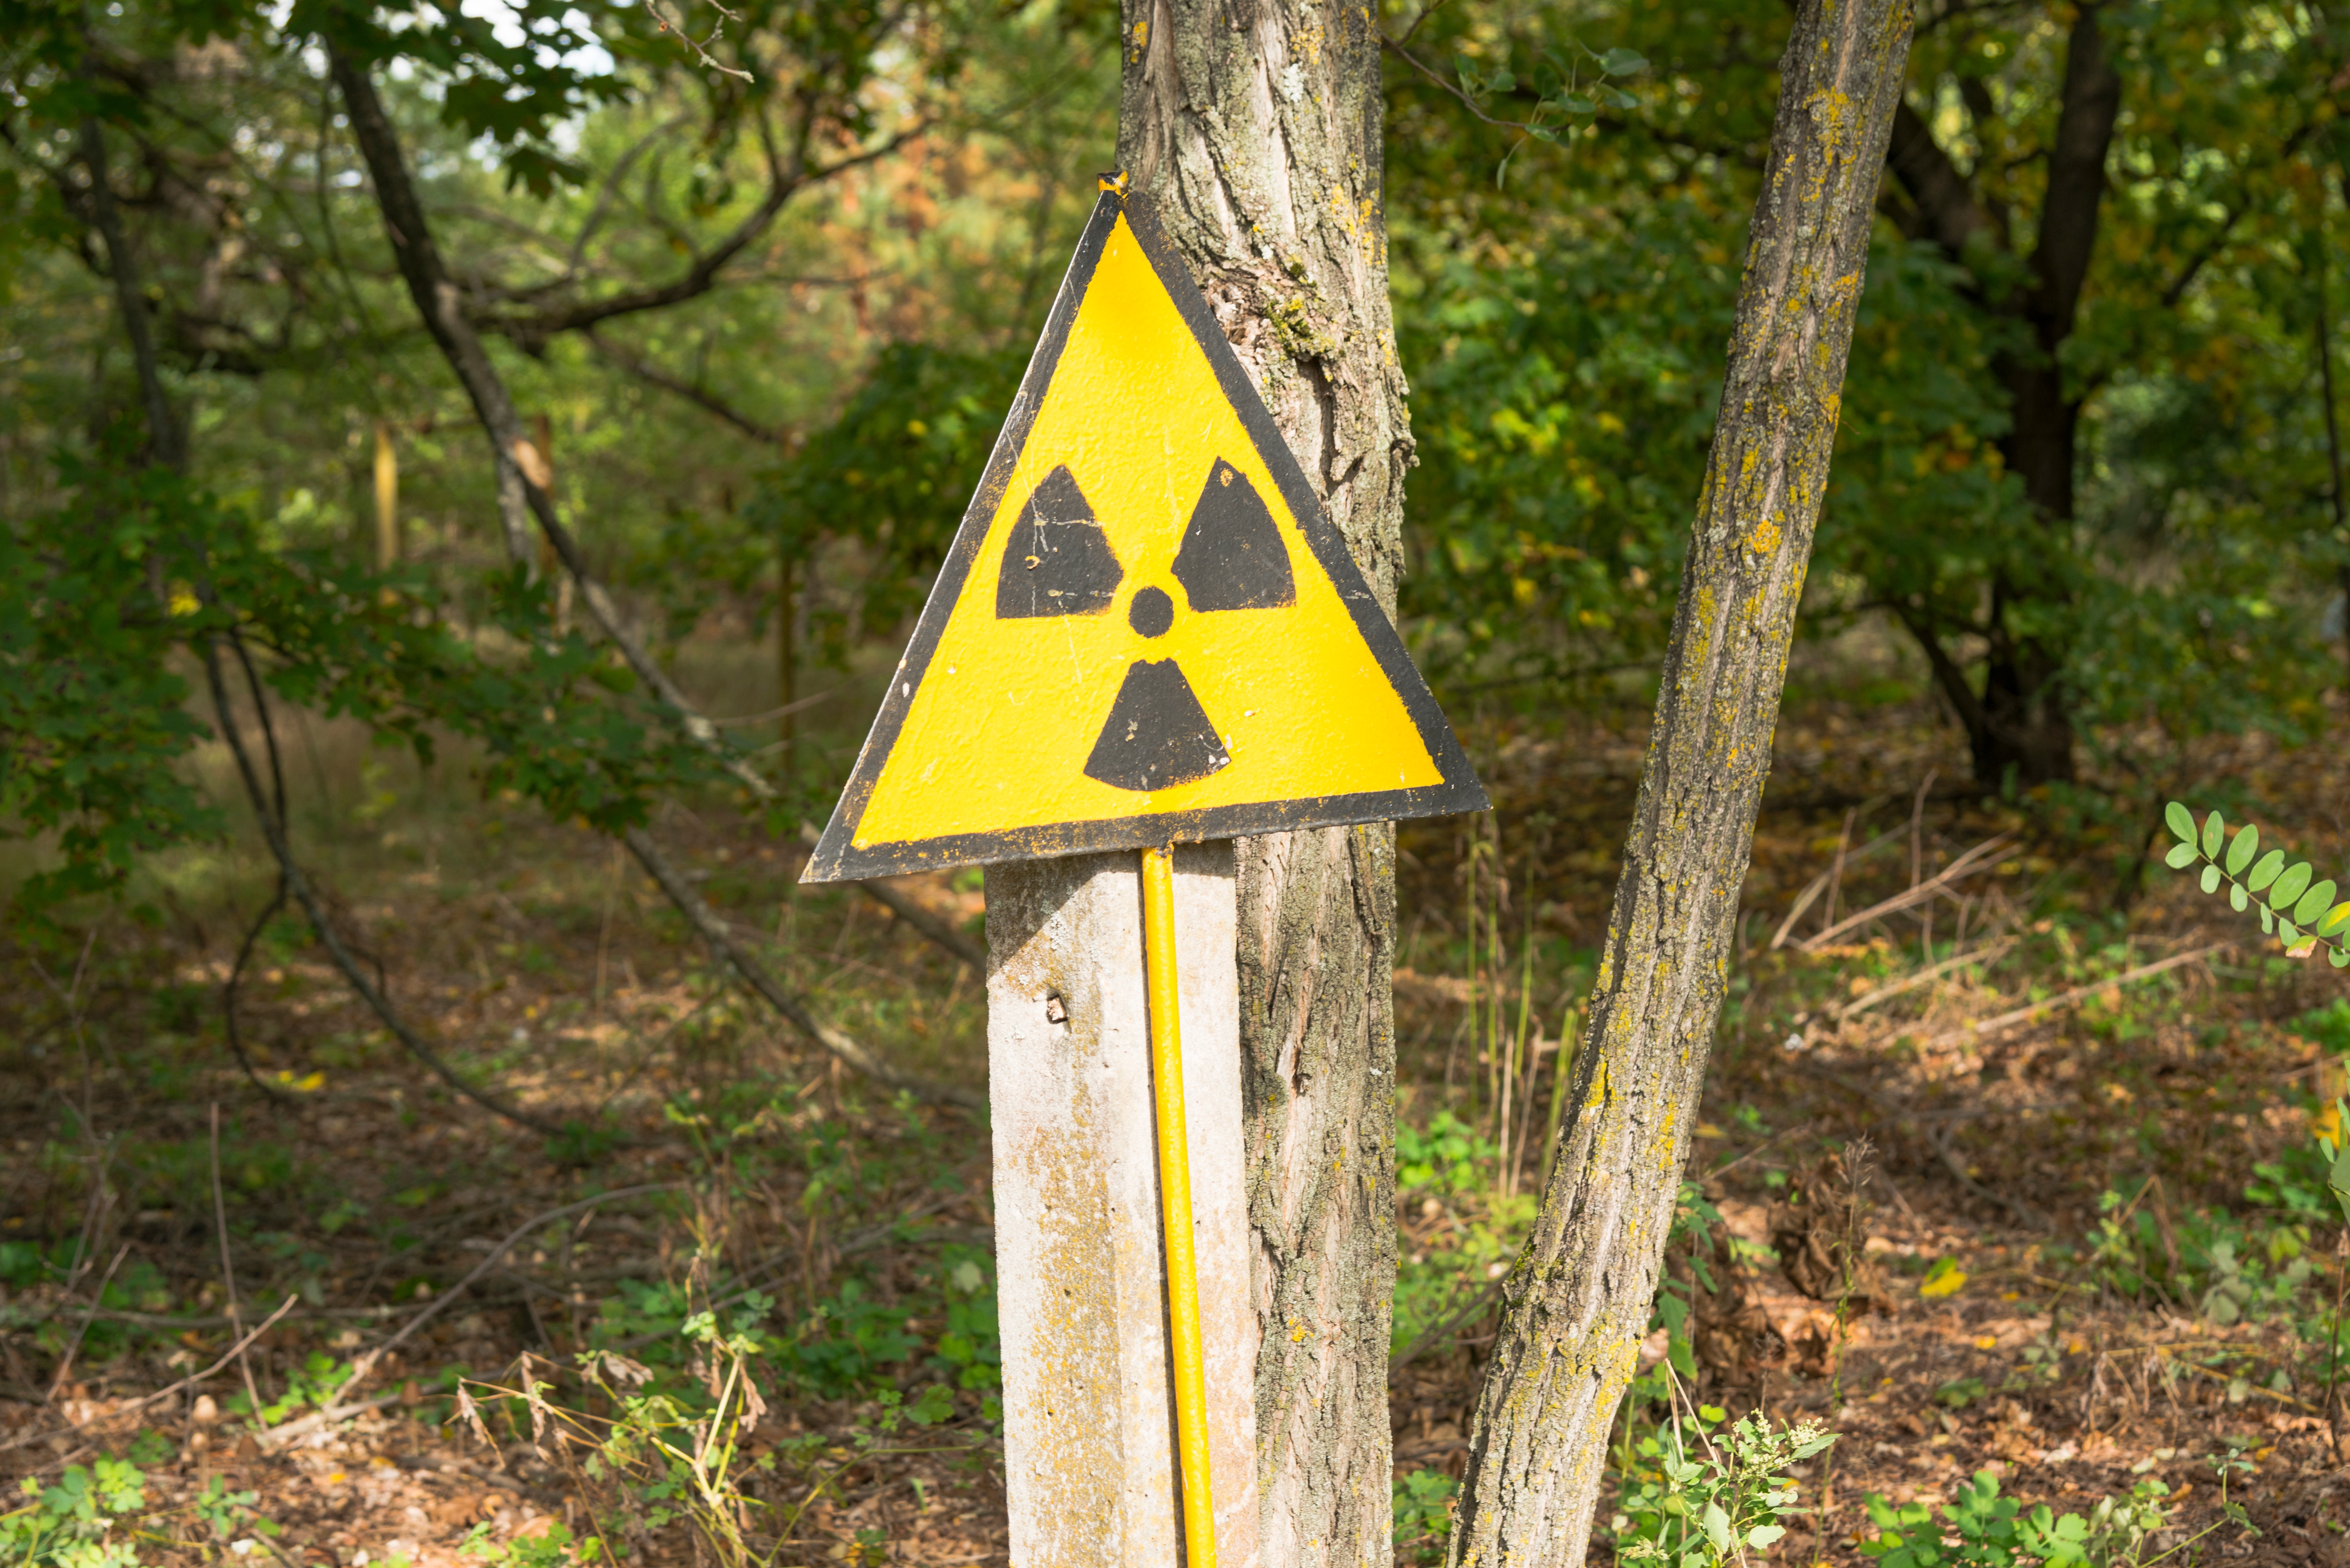 A warning sign pointing to a radiation-contaminated territory. | Source: Shutterstock